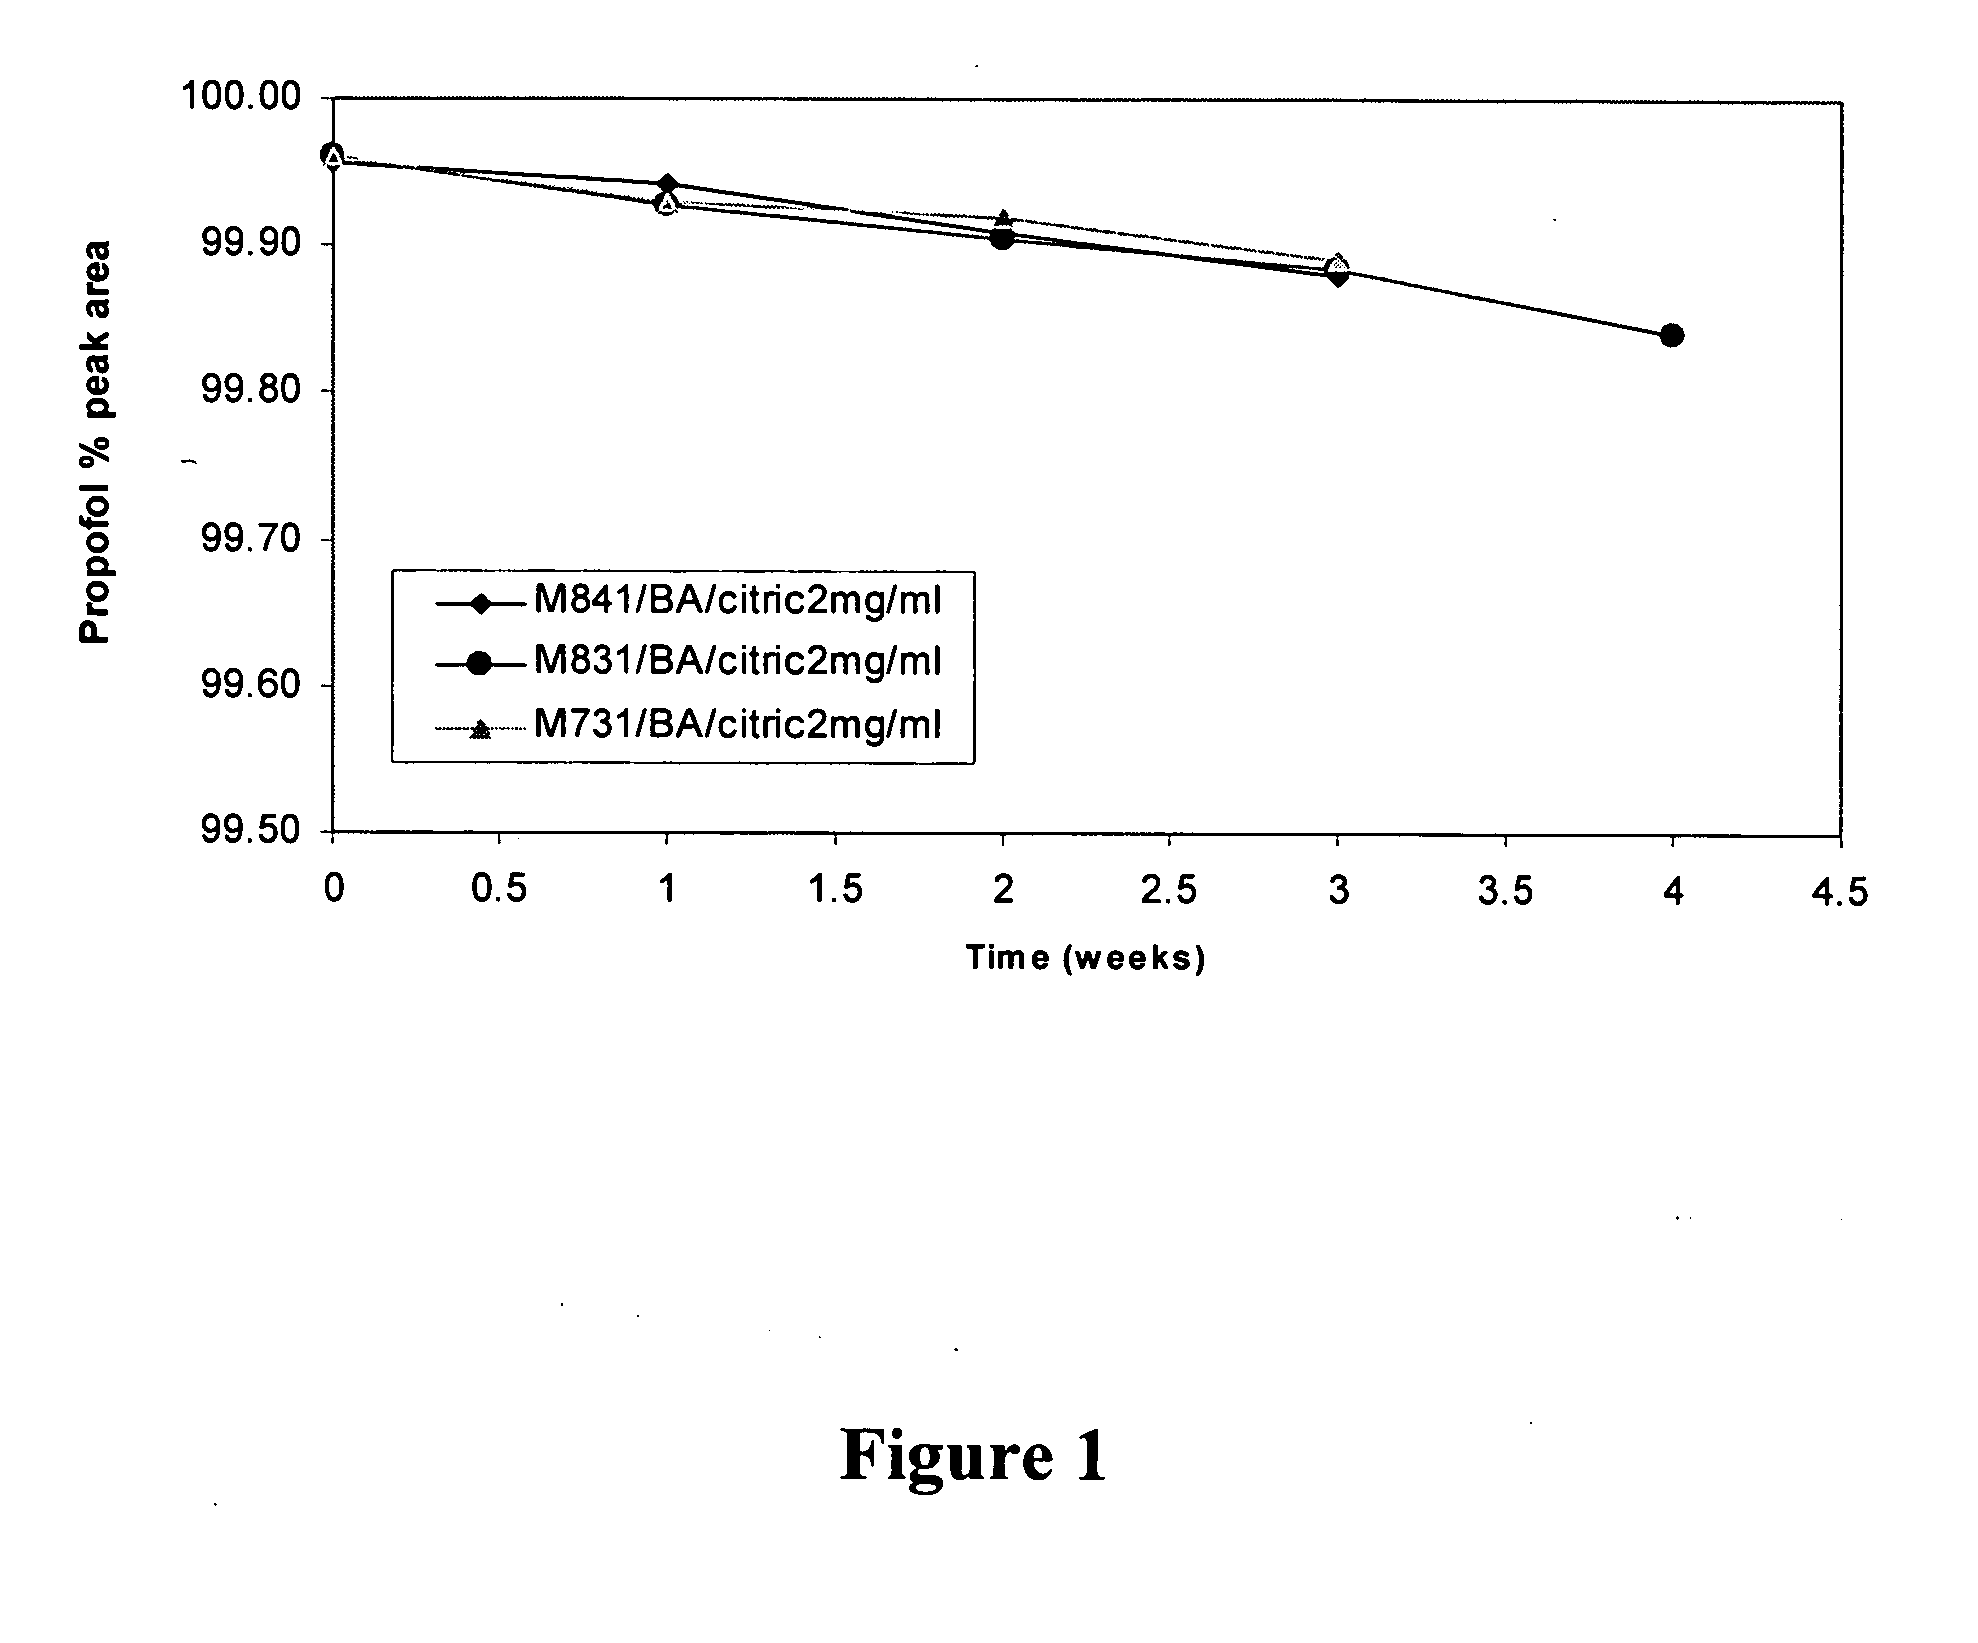 Aqueous pharmaceutical compositions of 2,6-diisopropylphenol (propofol) and their uses